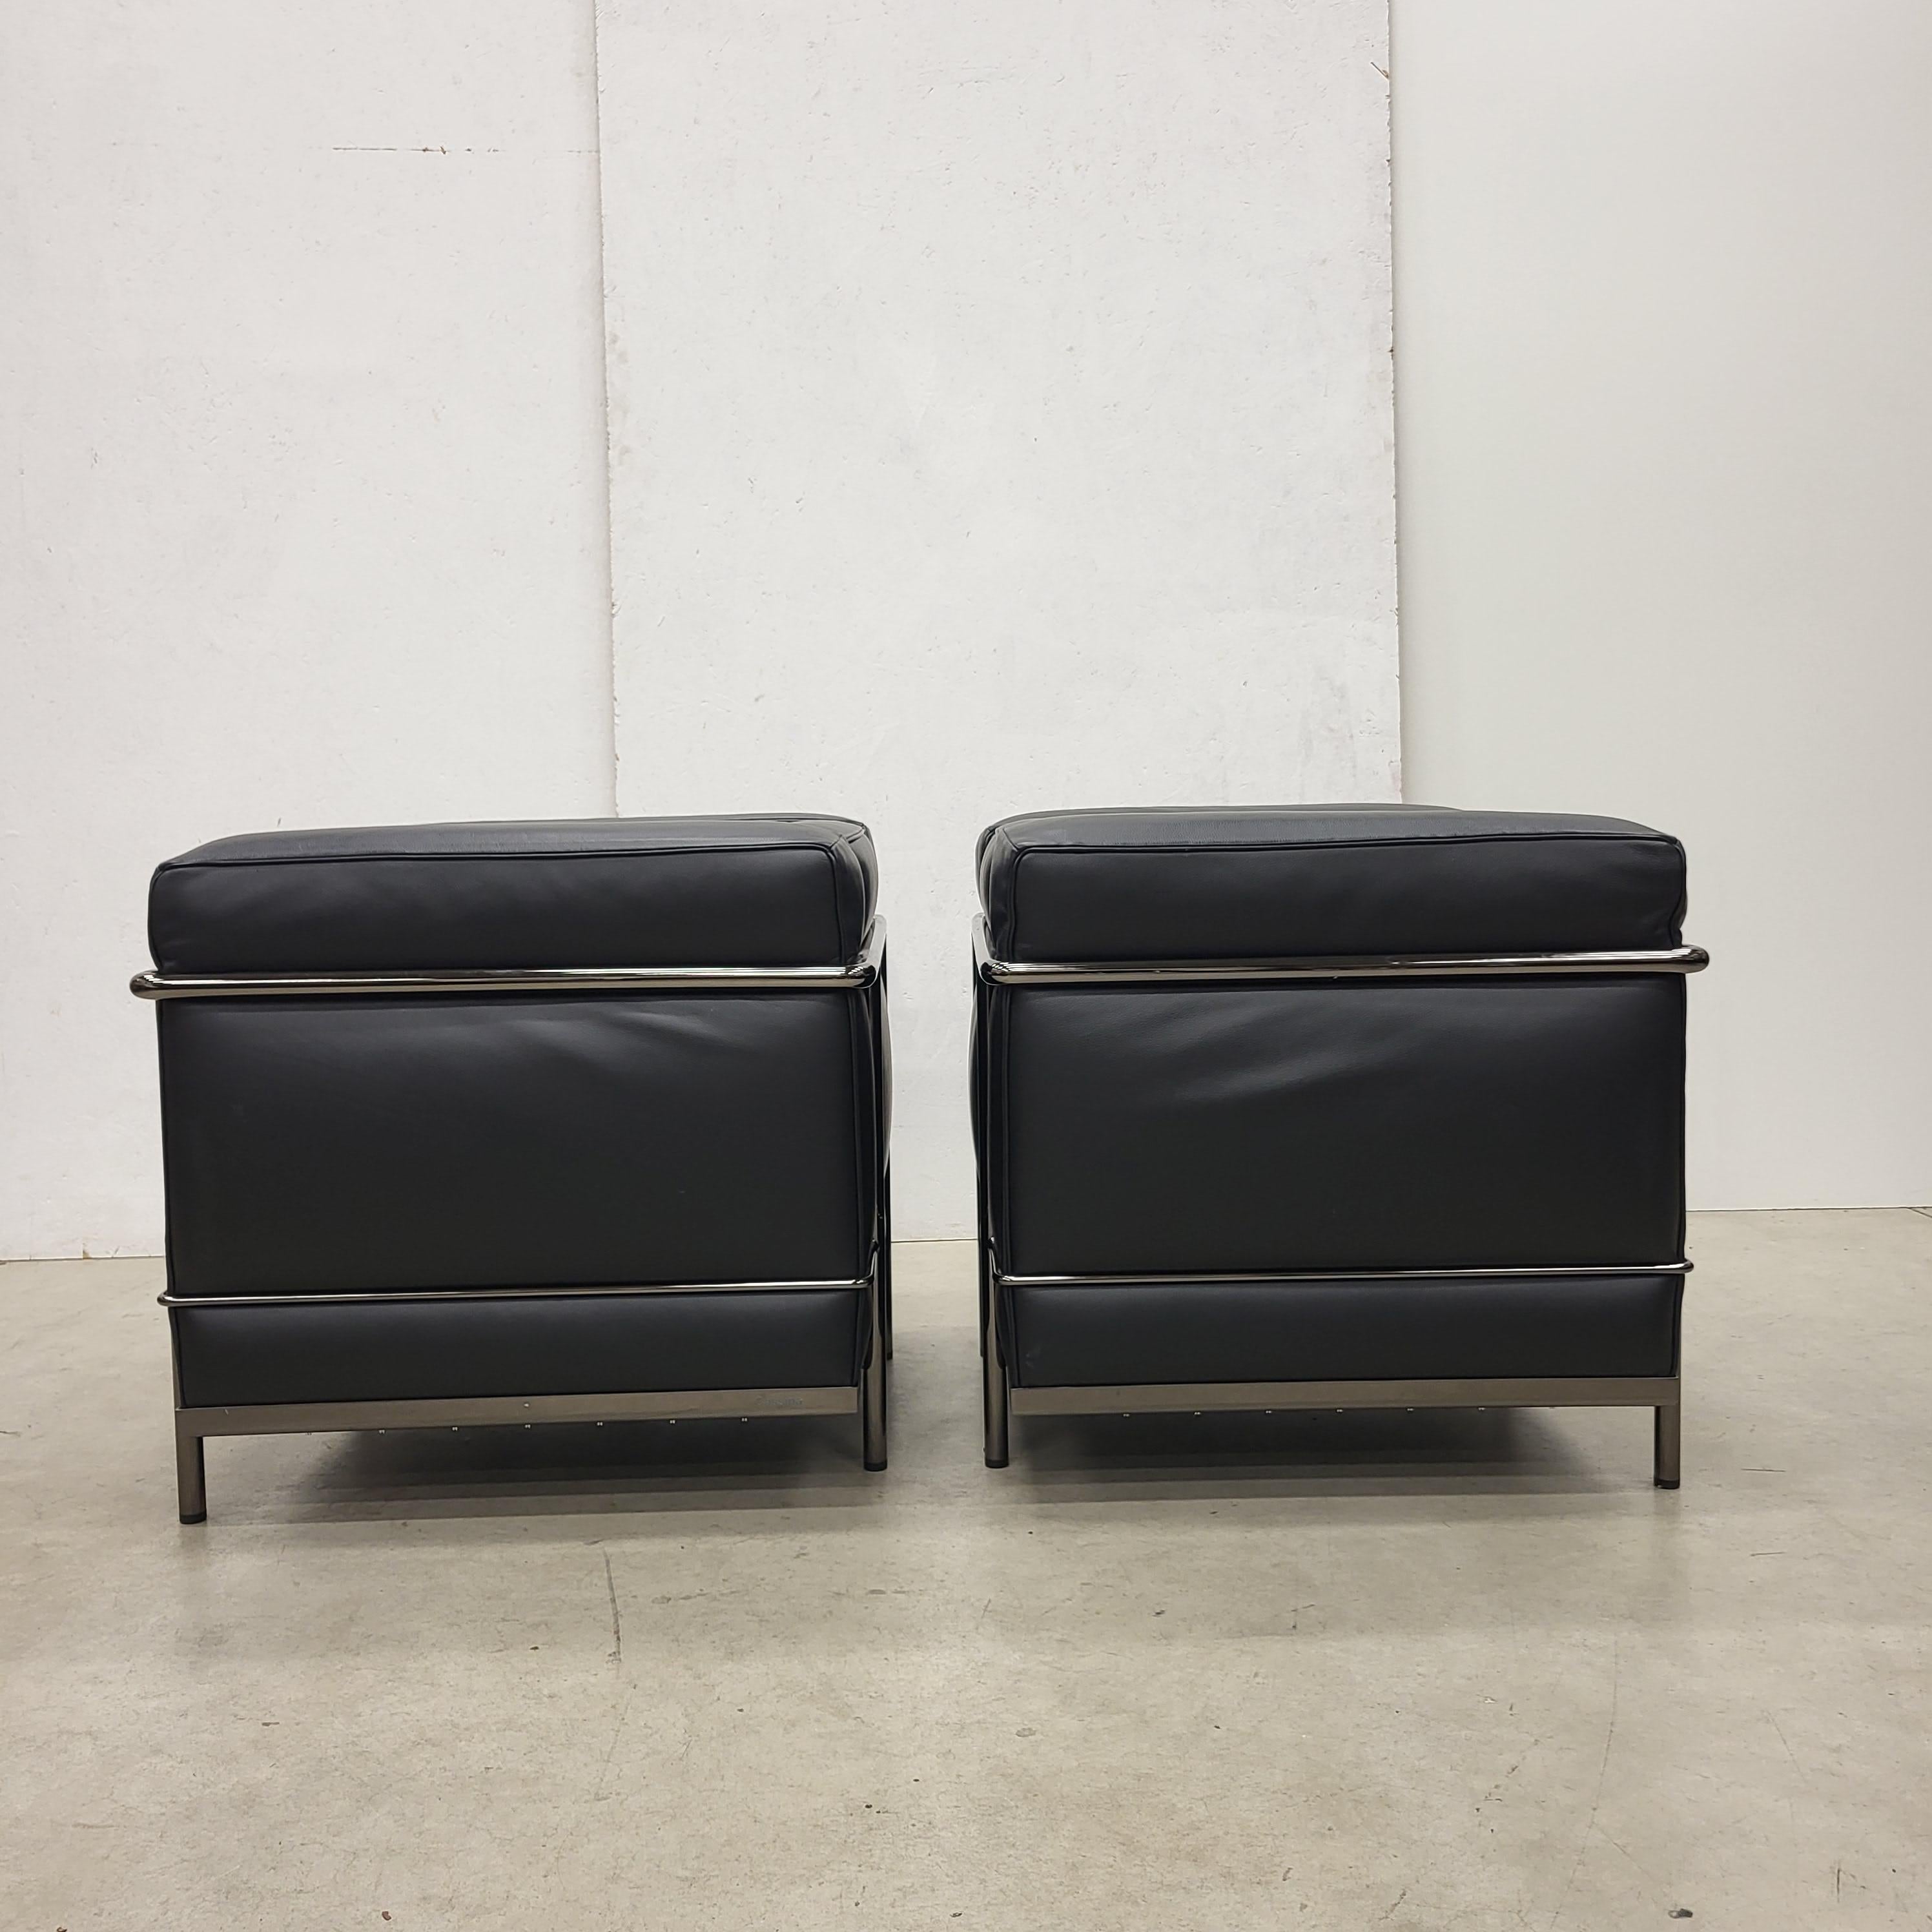 Hand-Crafted Pair Le Corbusier LC2 Club Chair by Cassina Smoked Chrome Edition 2019